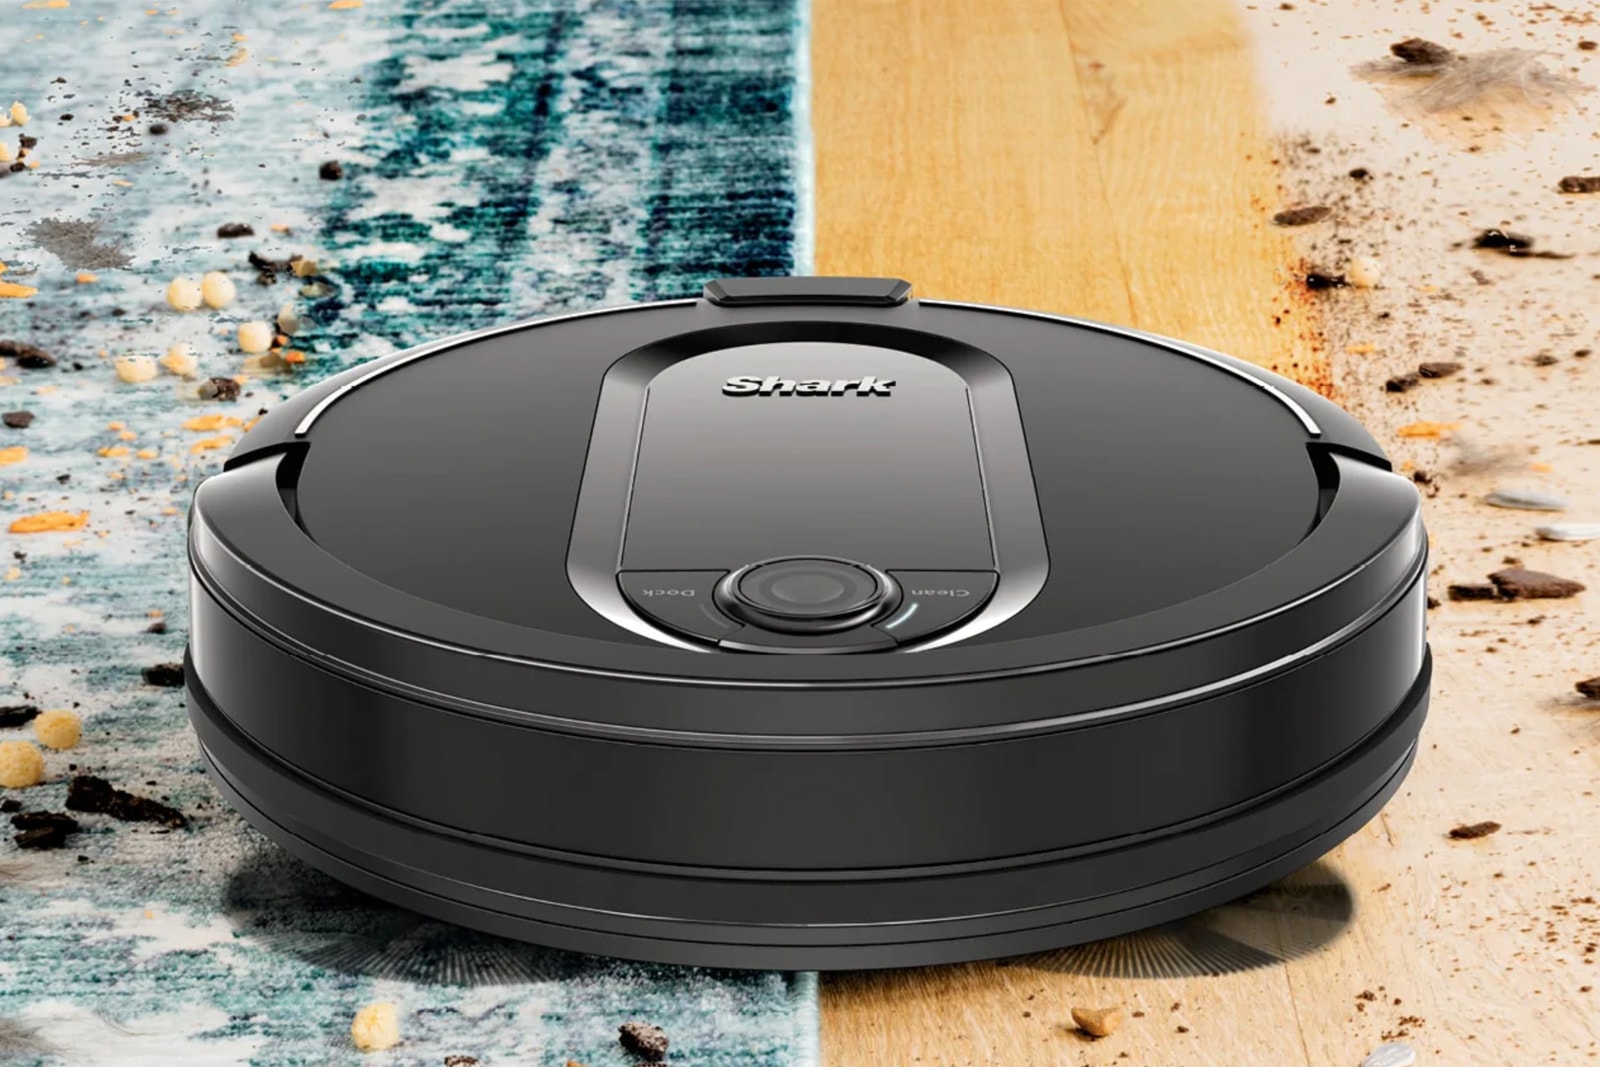 Grab Shark S Iq Self Emptying Robot Vacuum For 170 Off At